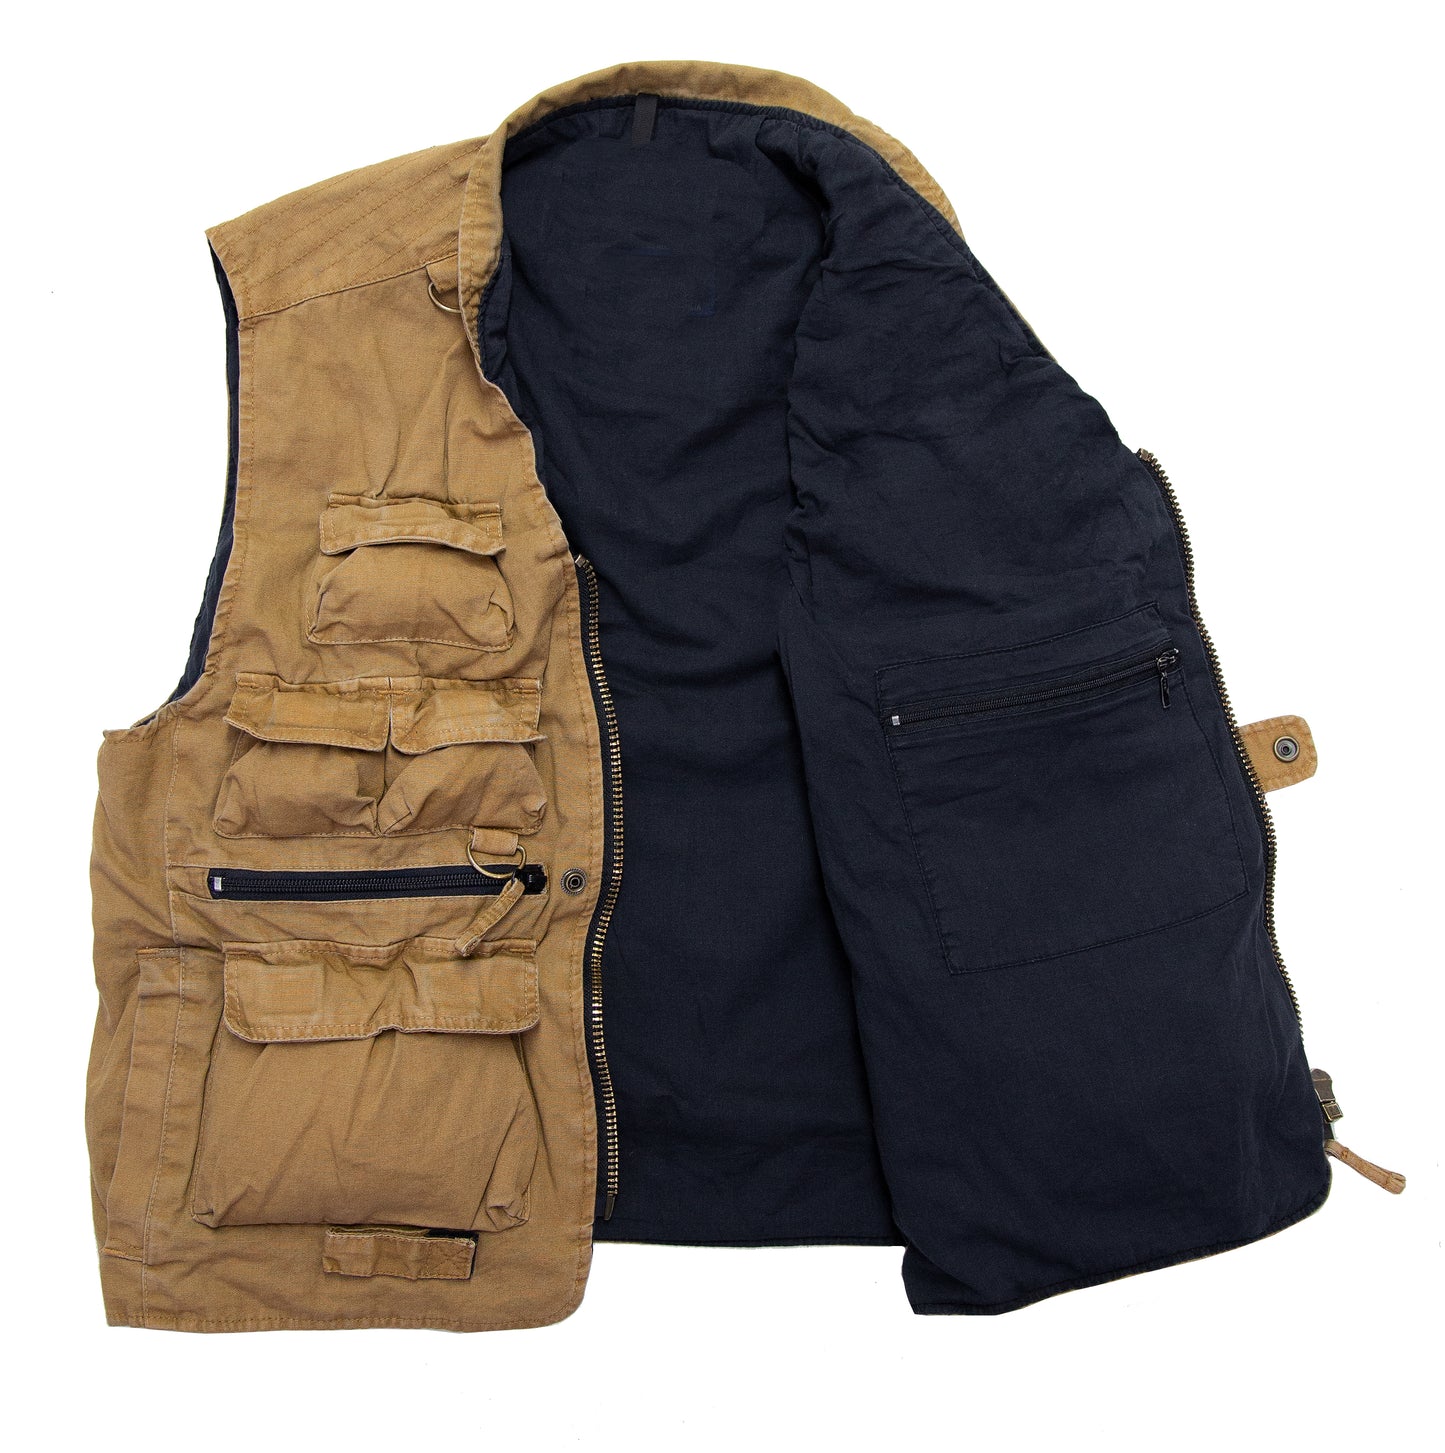 Robust leisure outdoor vest with many bags for women and men up to 5xl